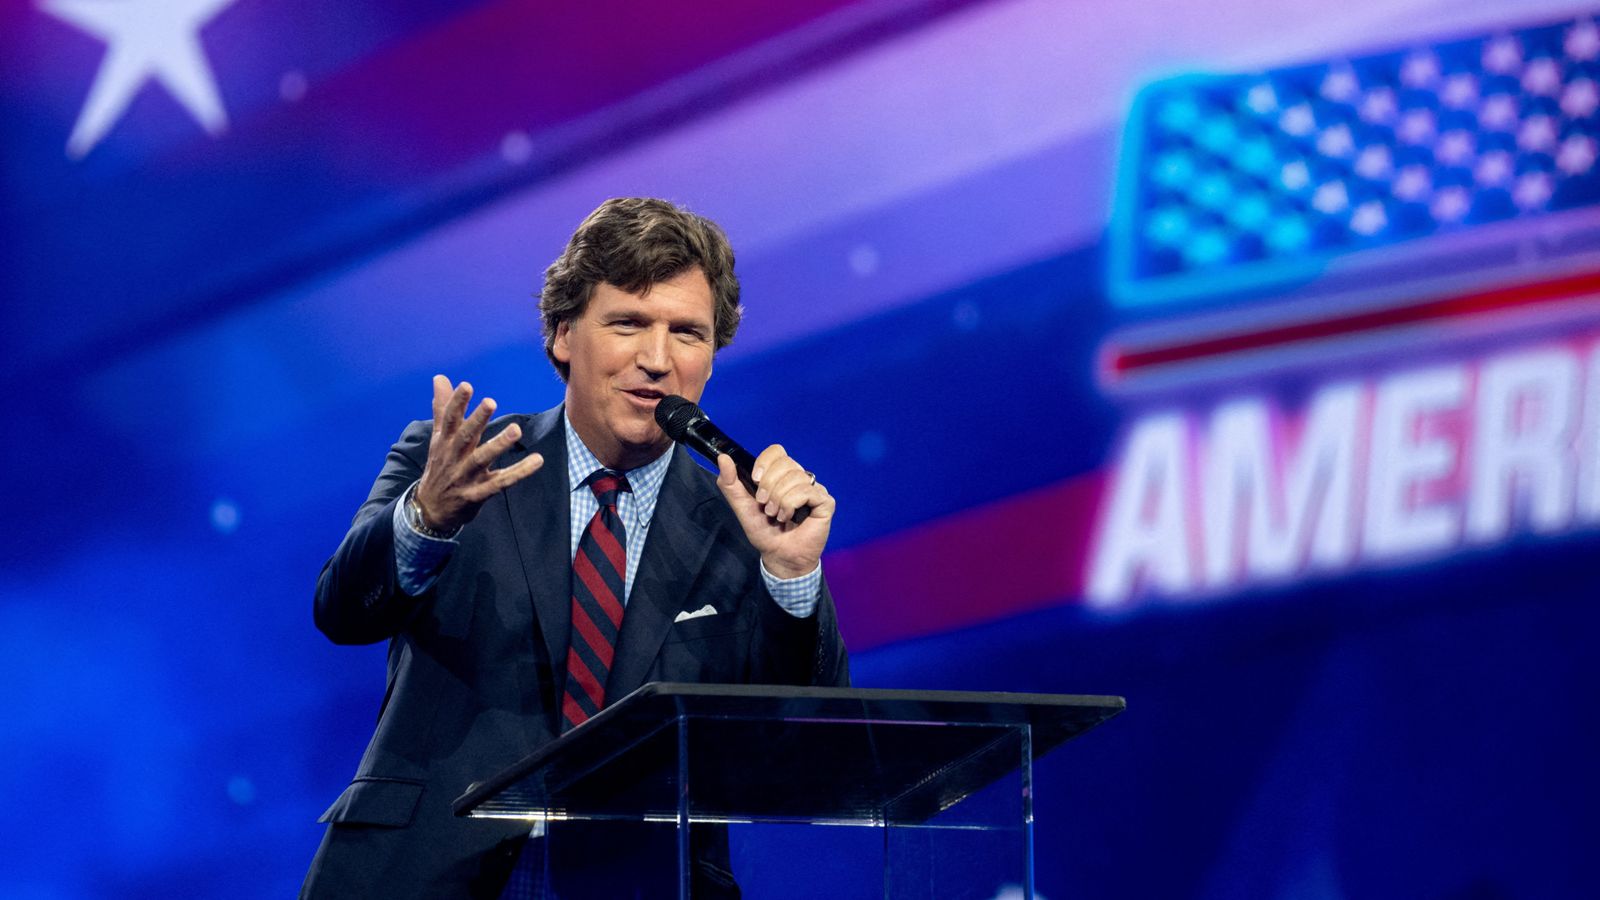 Tucker Carlson confirms Vladimir Putin interview as he hits out at Western media's 'fawning' Ukraine coverage